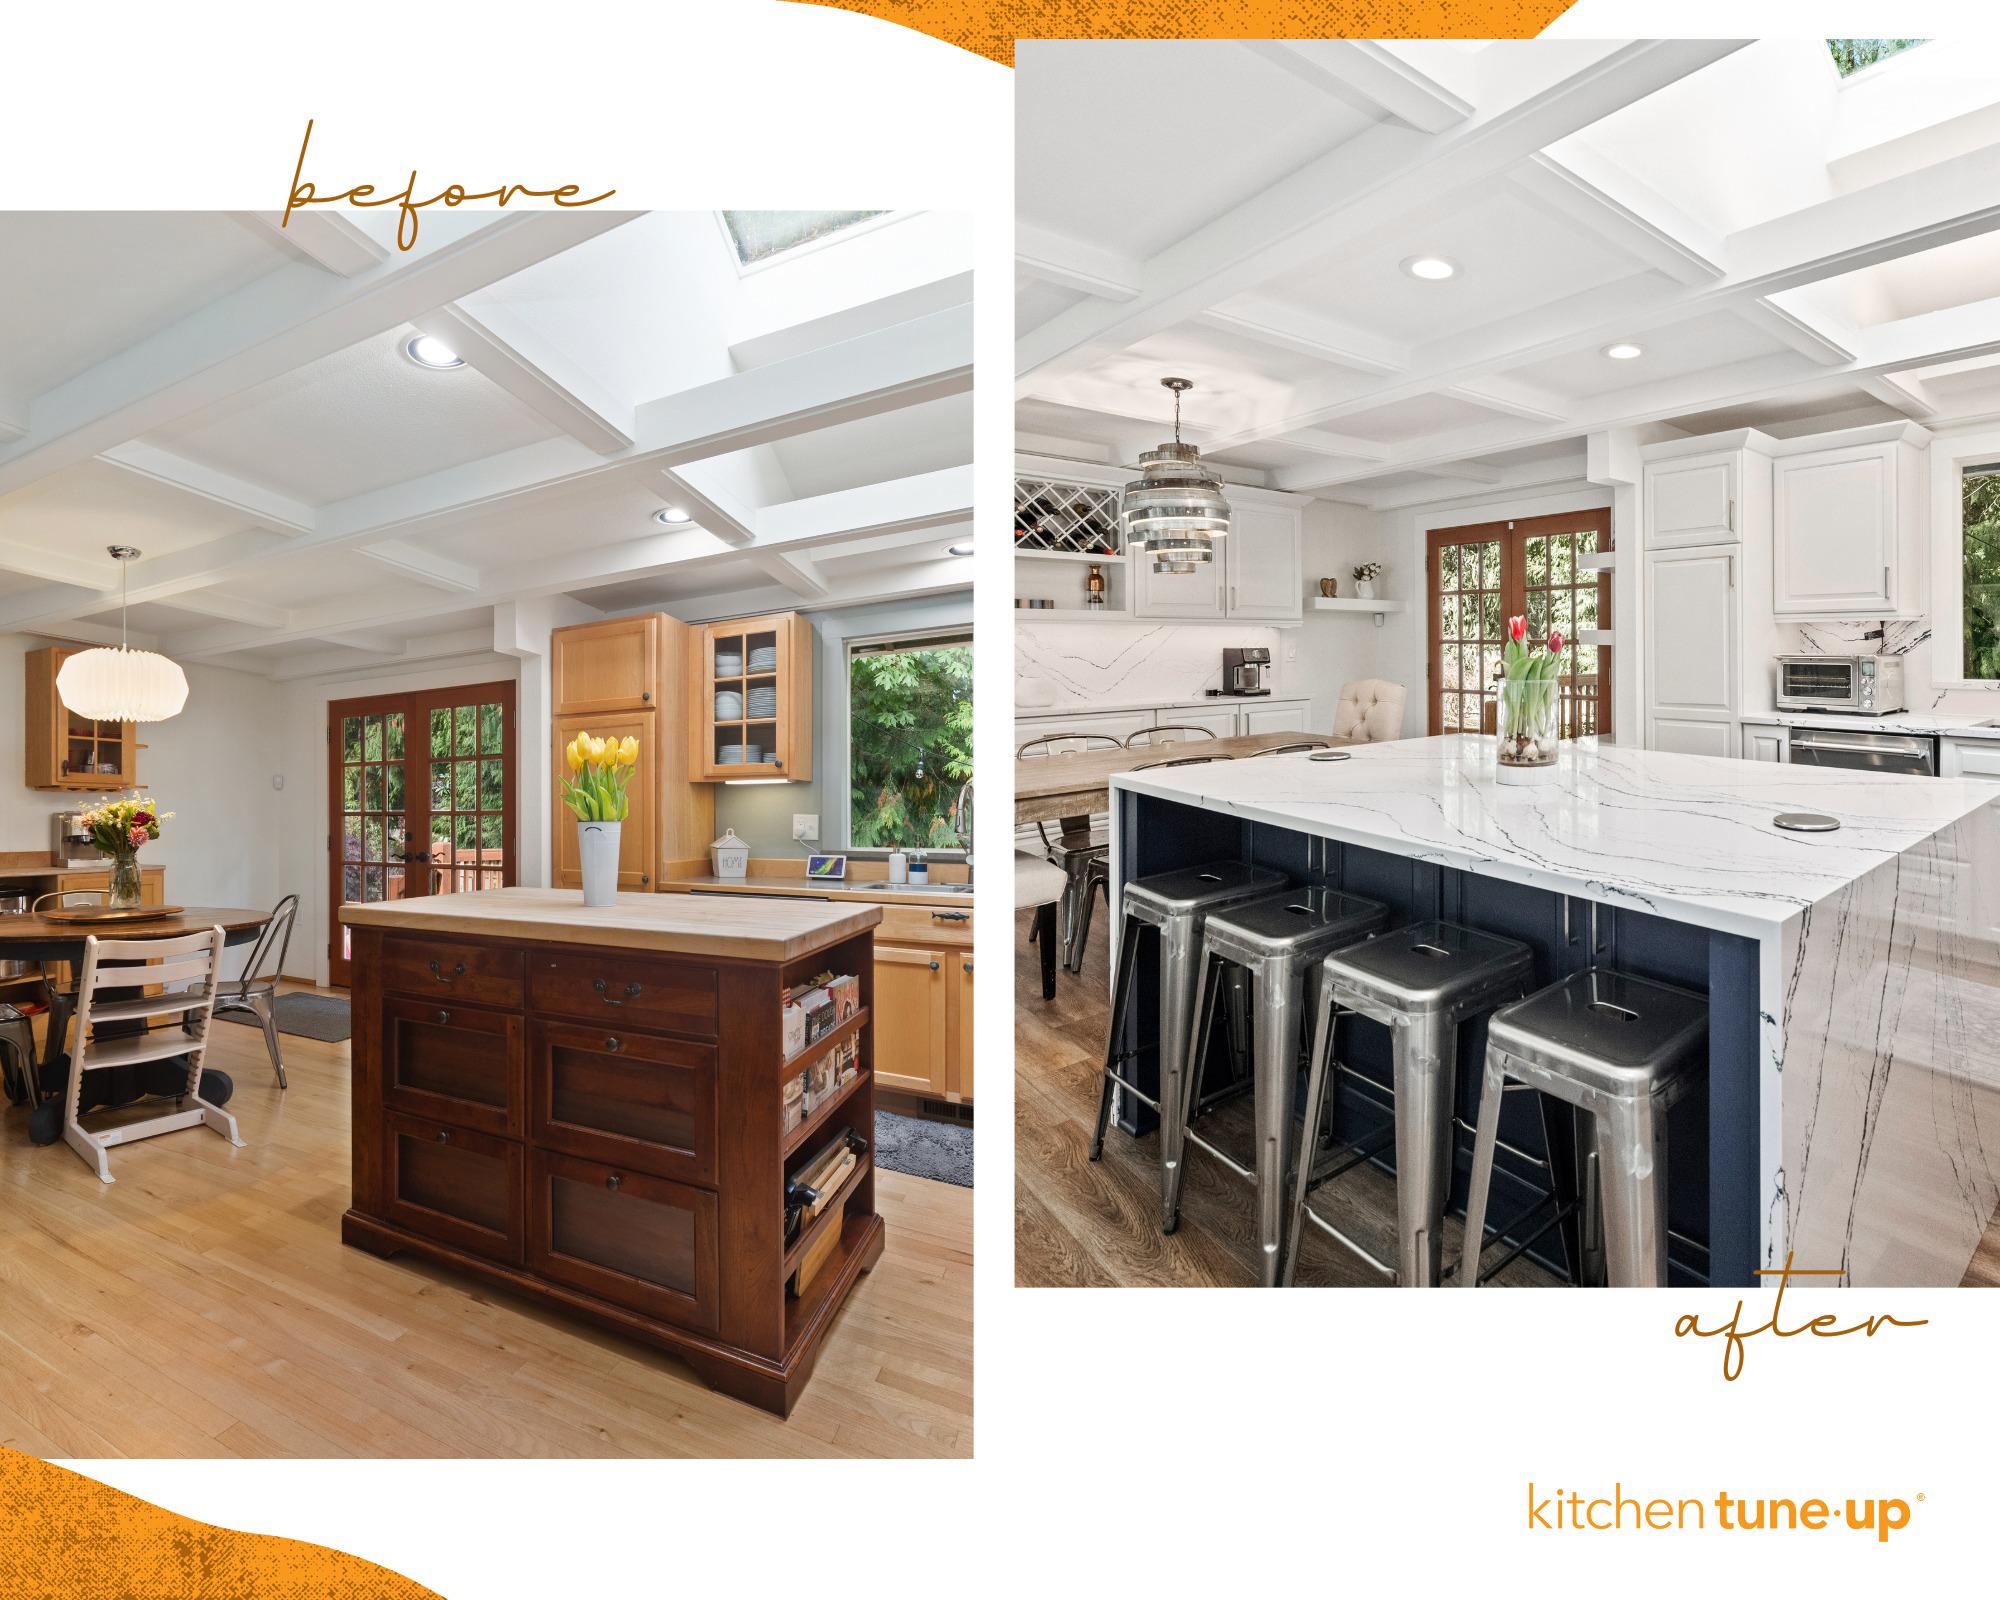 If you're looking to create a beautiful new kitchen, think about which features are the most importa Kitchen Tune-Up Savannah Brunswick Savannah (912)424-8907